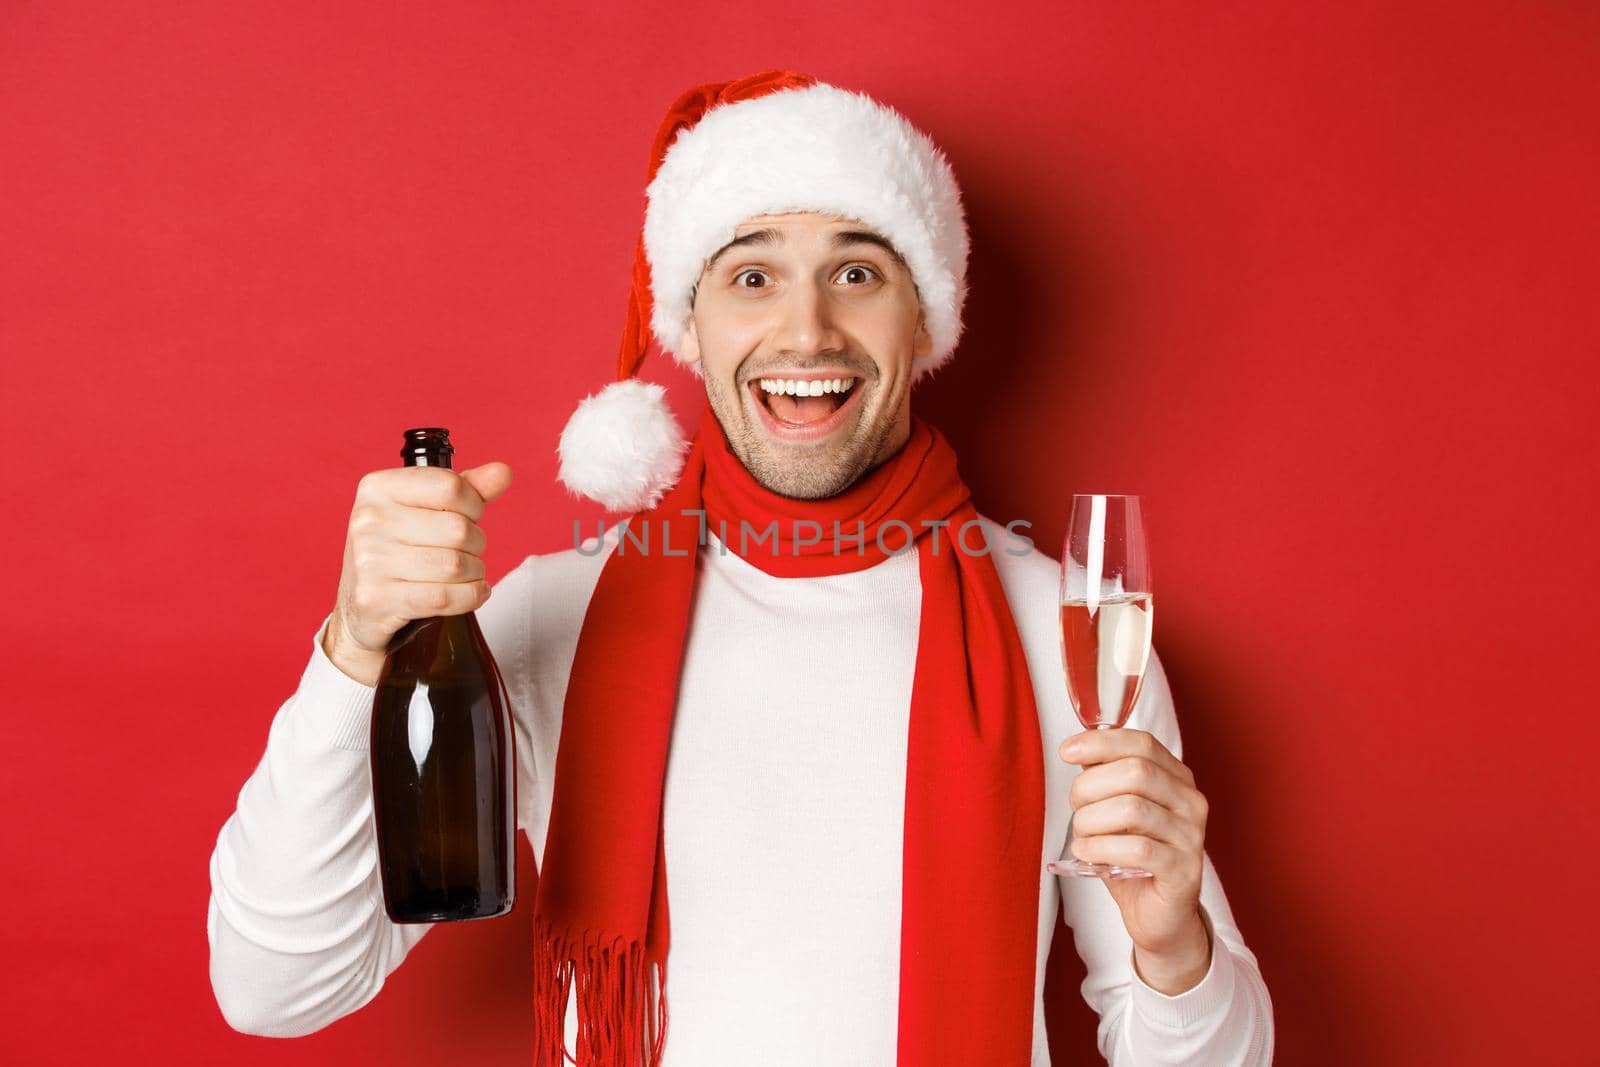 Concept of winter holidays, christmas and lifestyle. Close-up of cheerful handsome man, holding champagne bottle and glass, celebrating new year, standing over red background.